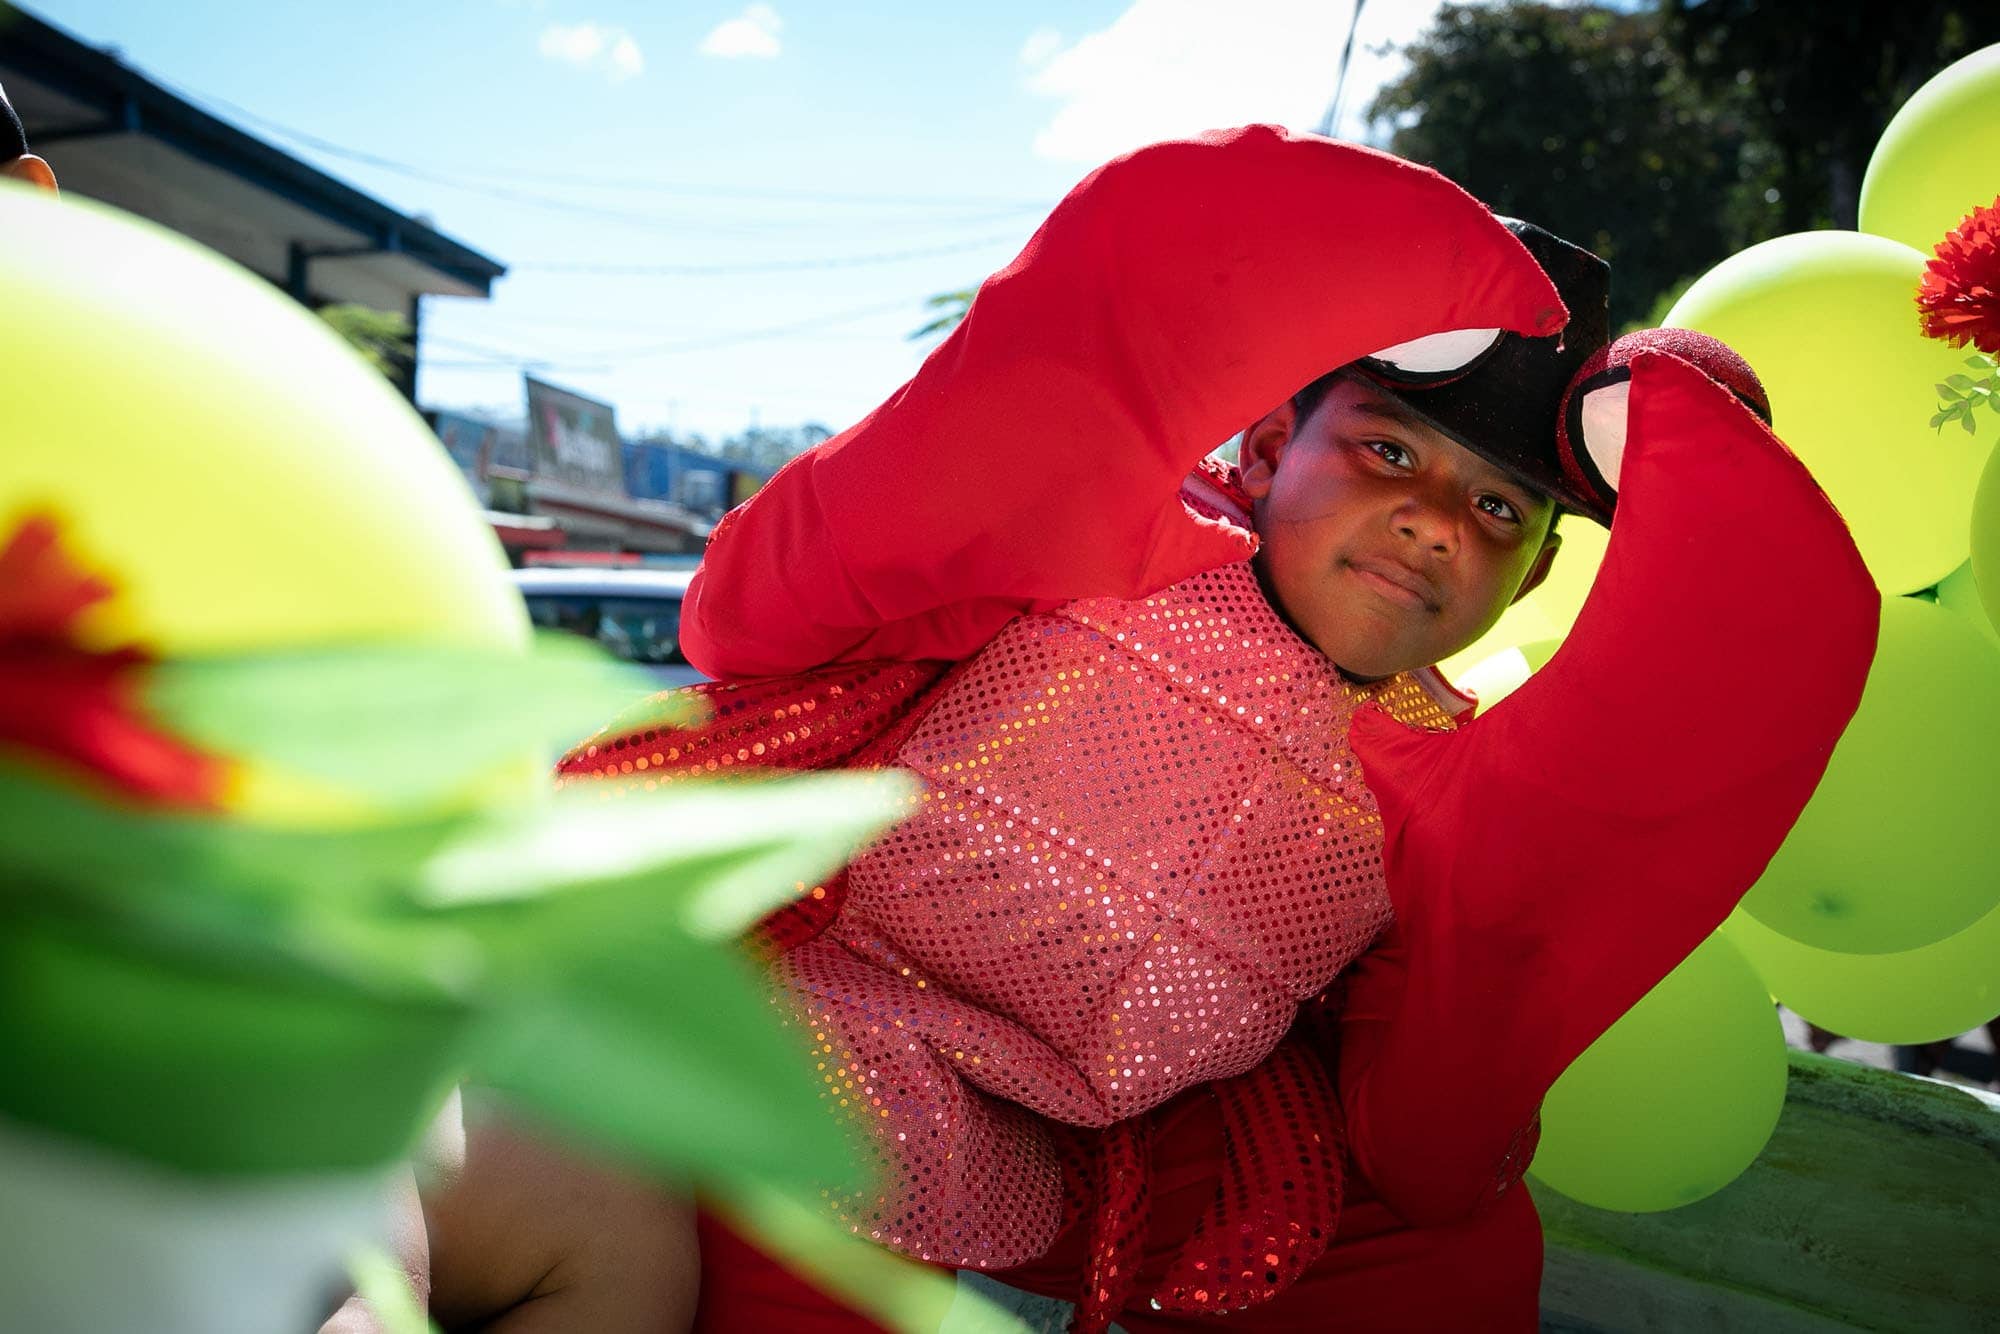 Boy in a lobster costume for the independence day parade in Costa Rica